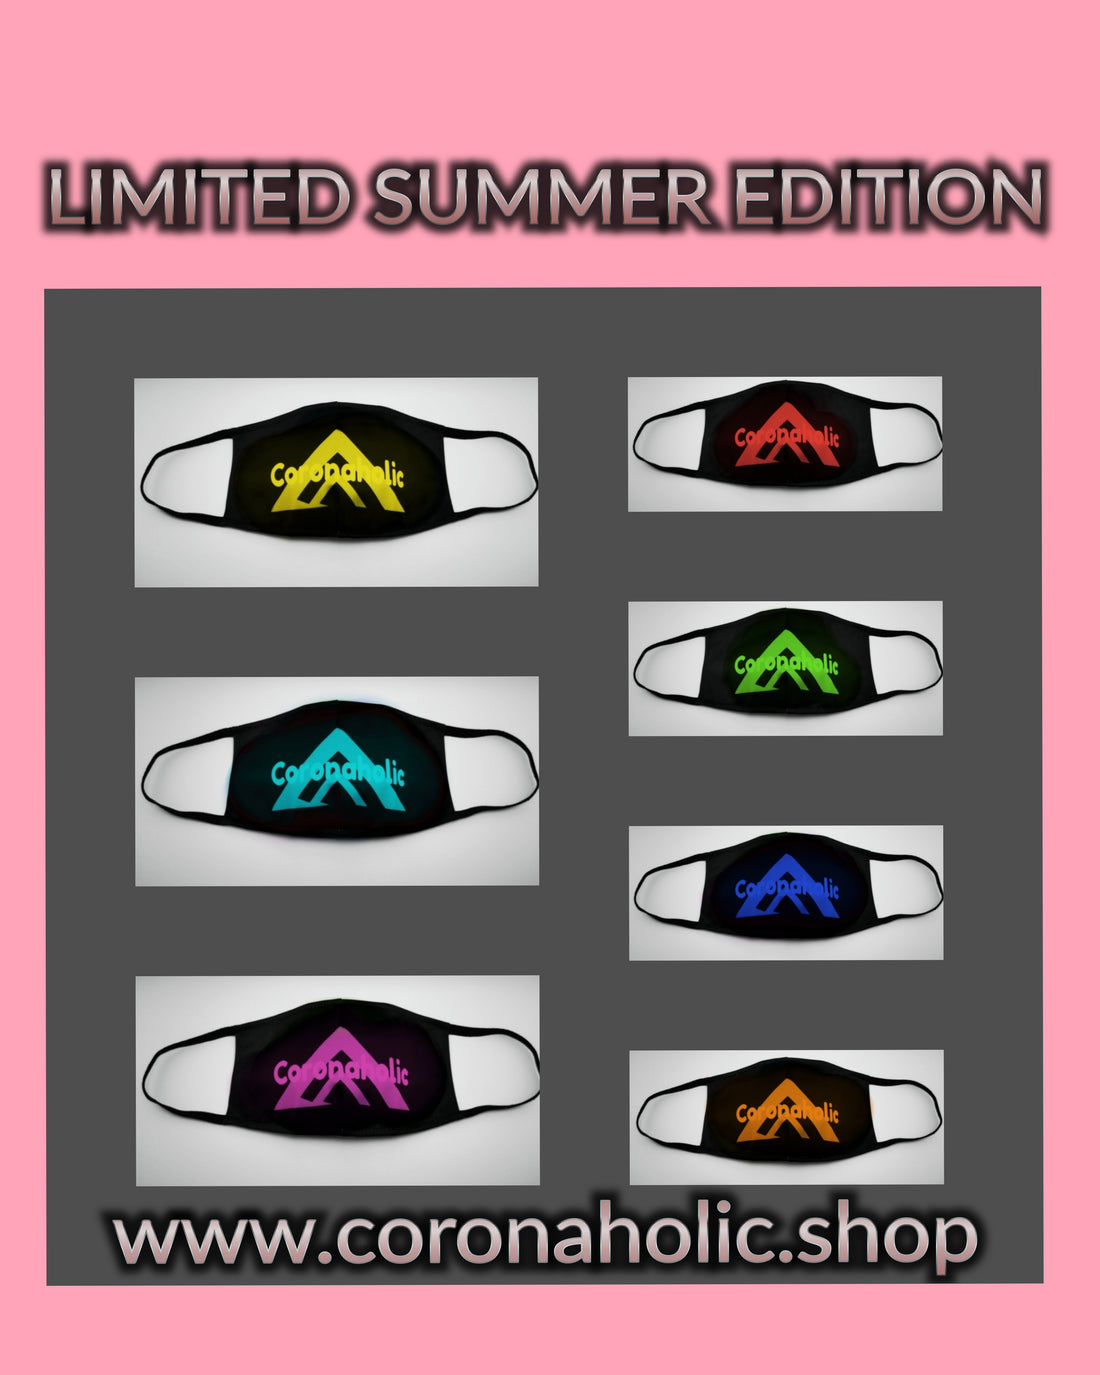 NOW AVAILABLE - our Limited Summer Edition